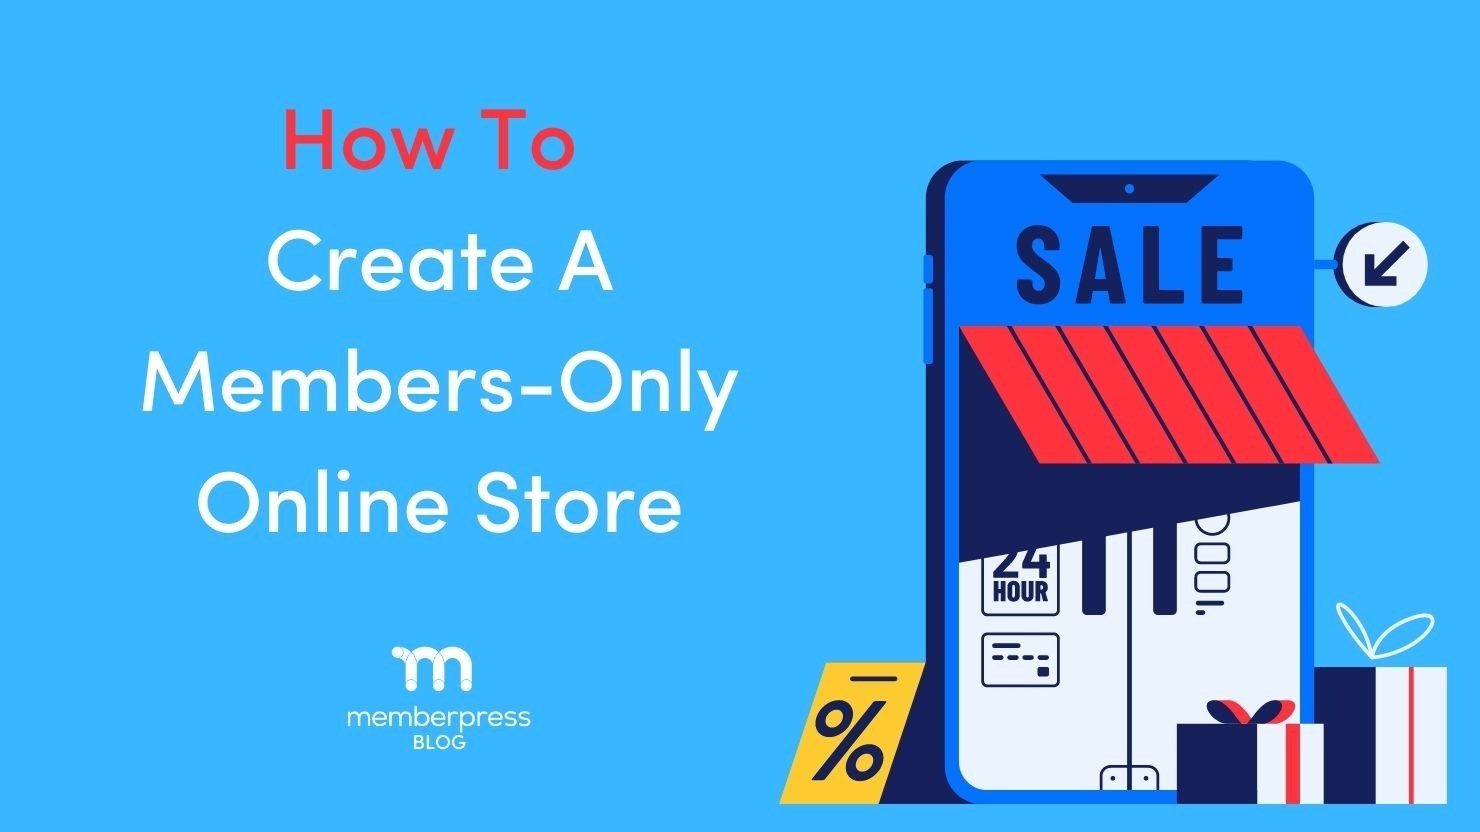 Creating an online store for your membership site with woocommerce